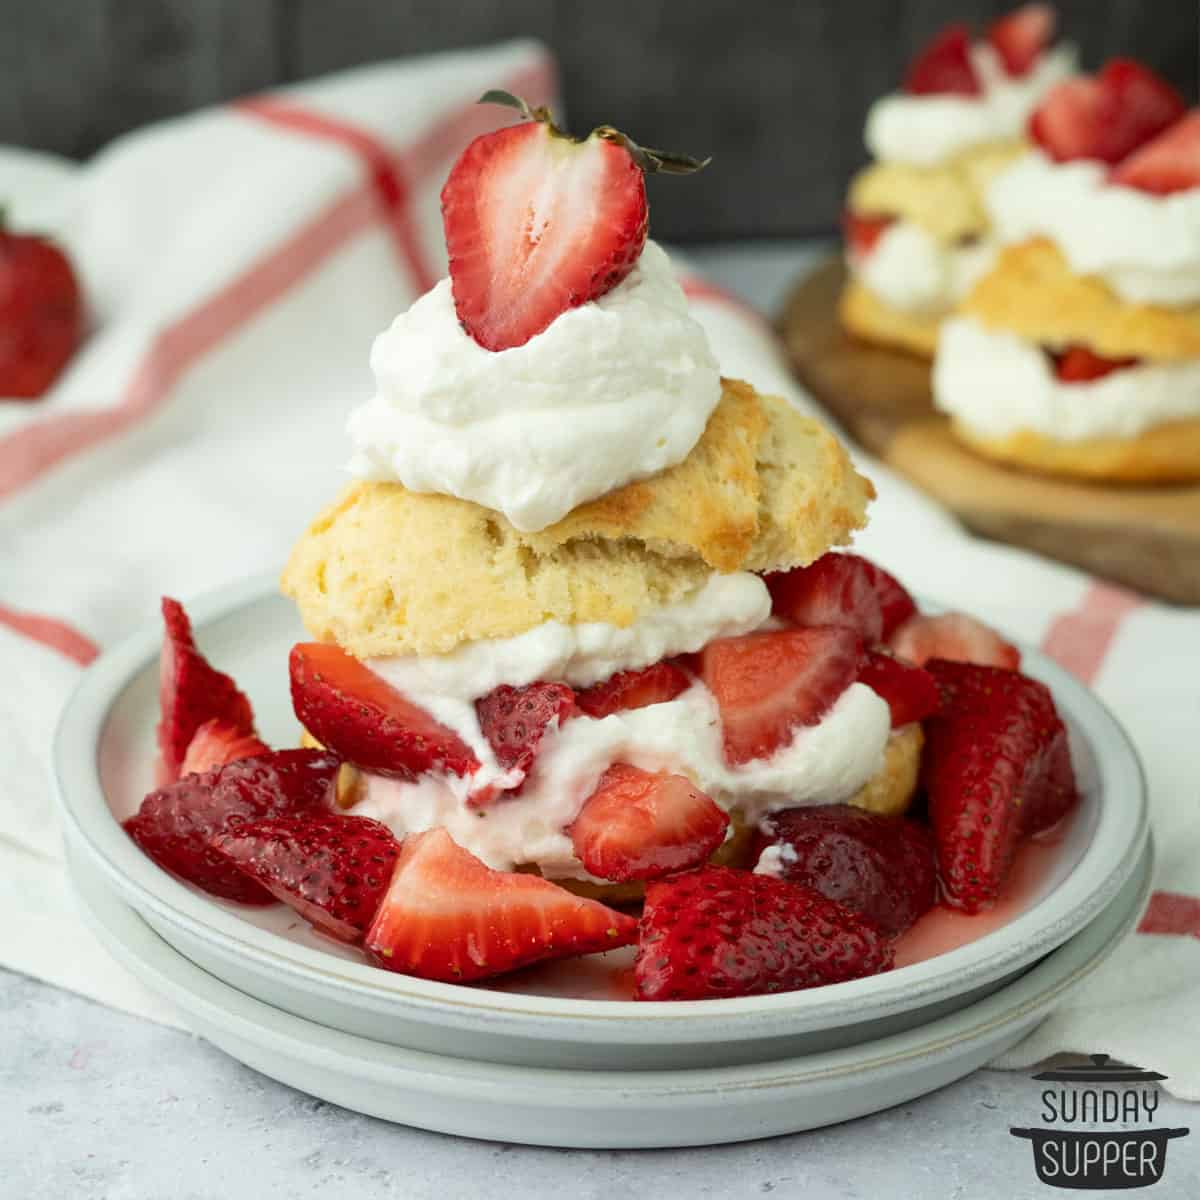 strawberry shortcake with homemade biscuits on a plate with fresh juicy strawberries and whipped cream